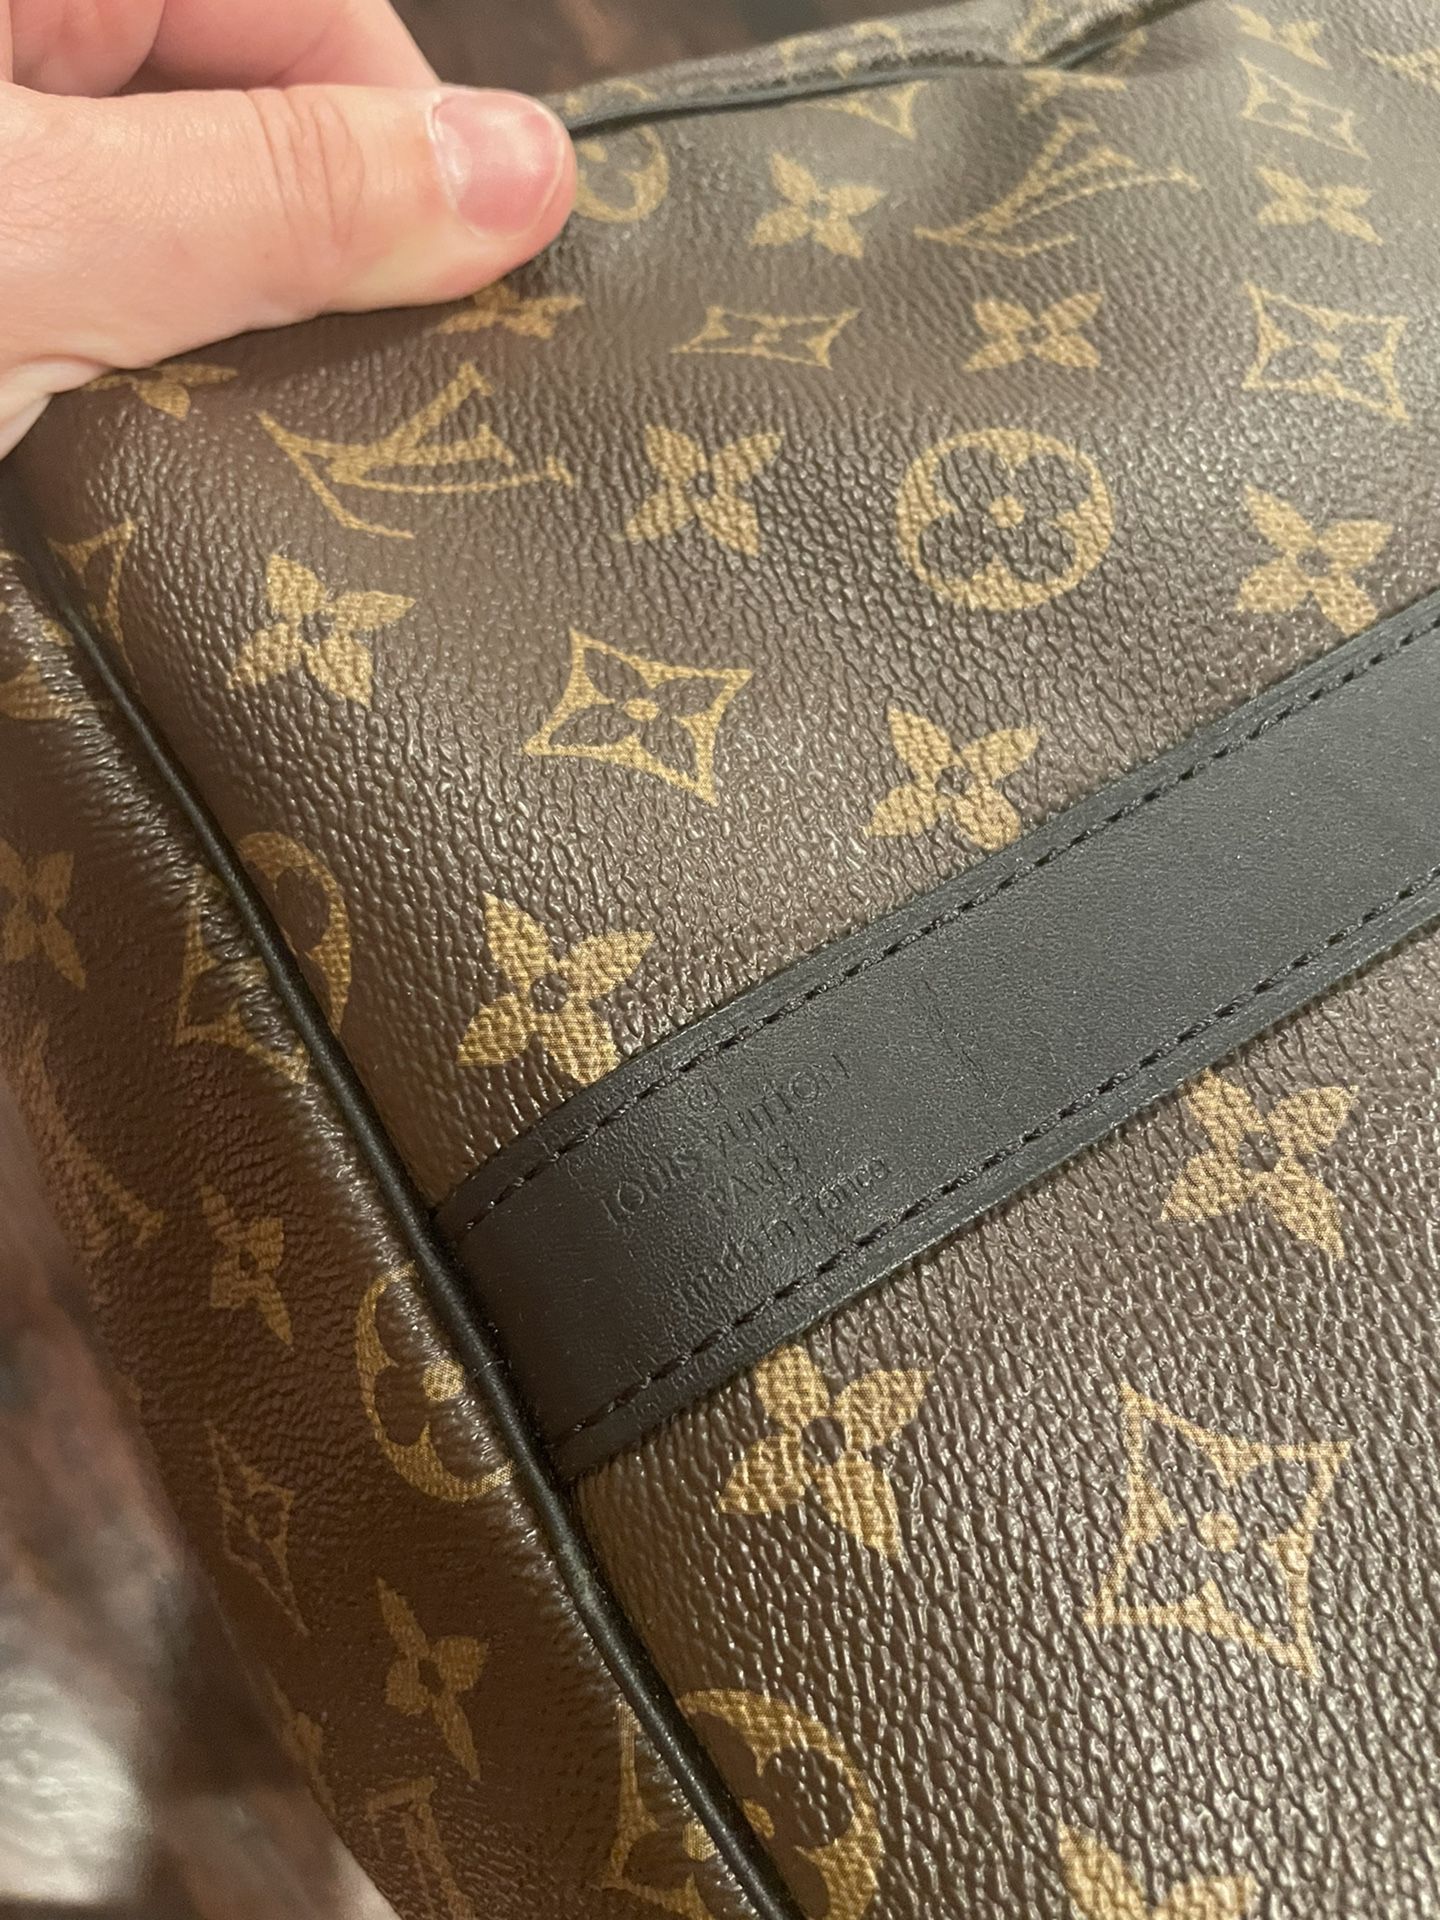 Louis Vuitton Keepall XS Bags for Sale in Houston, TX - OfferUp